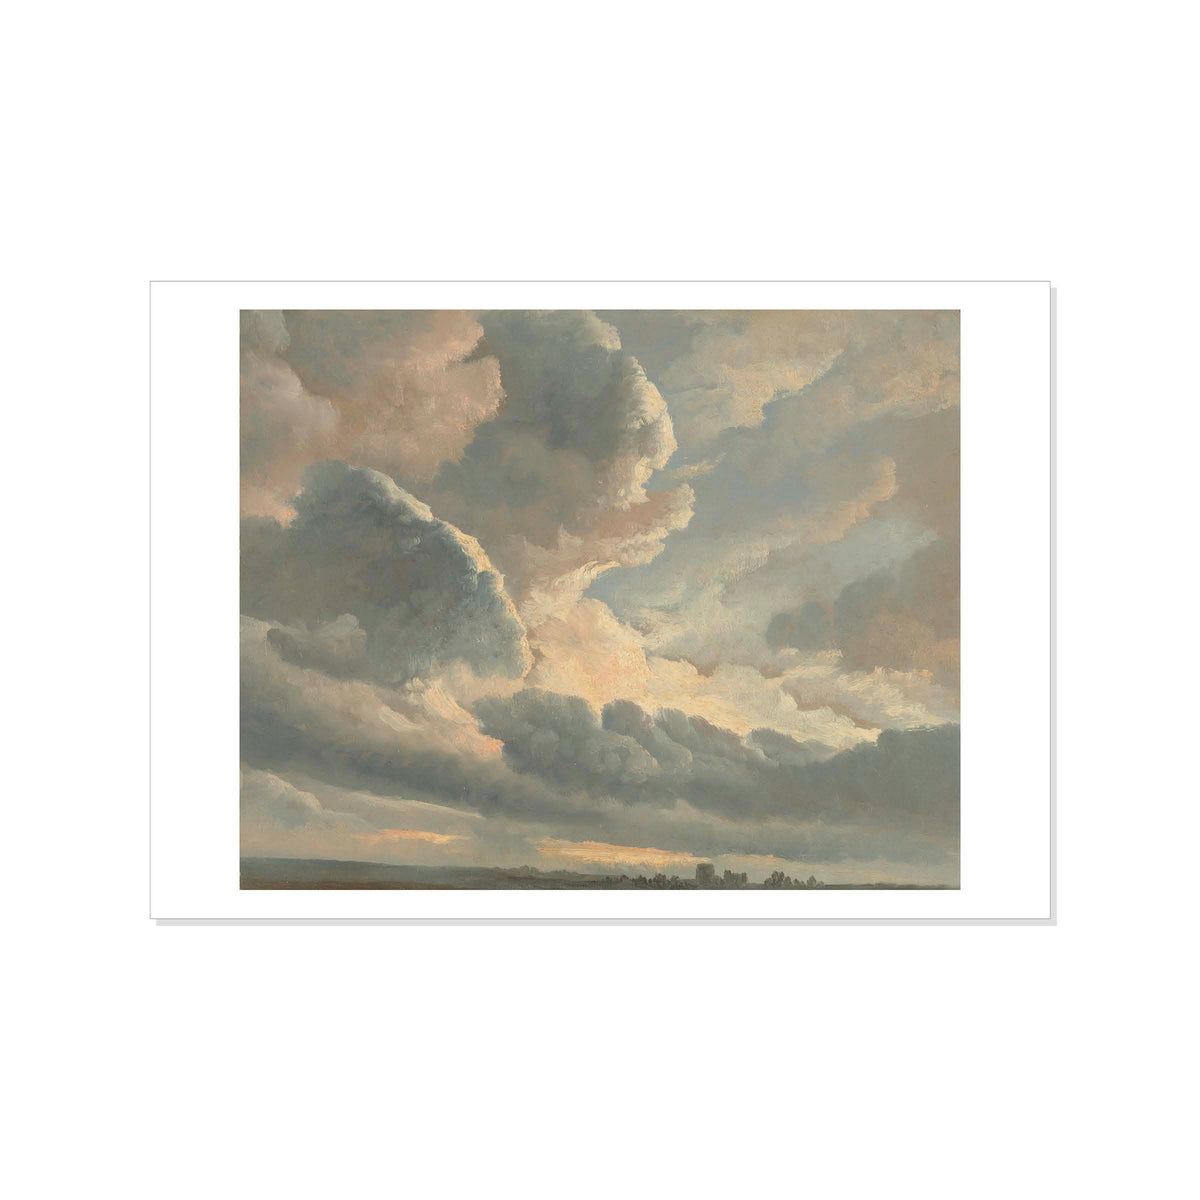 Denis - Study of Clouds with a Sunset Near Rome - Postcard